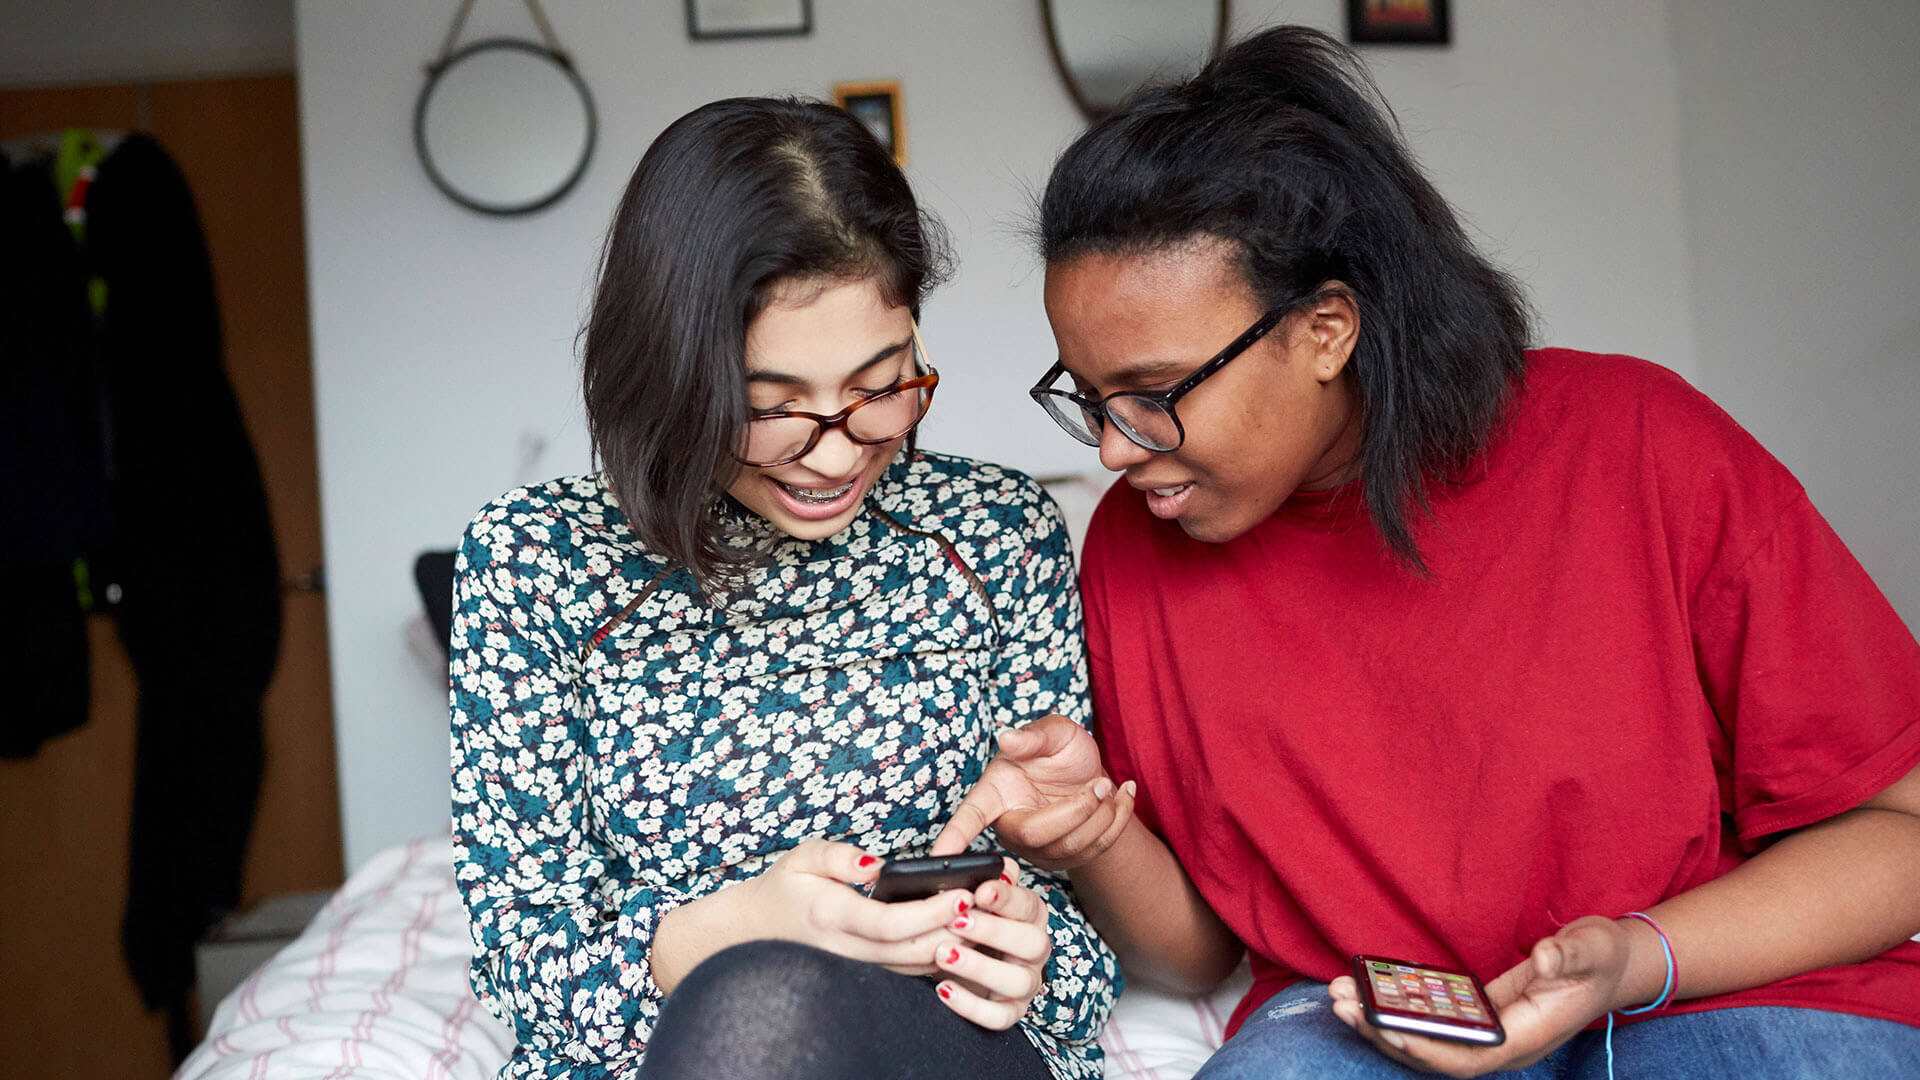 Two young people, both wearing glasses sit on a bed in a bedroom each holding a phone. The person on the right is pointing at the person on the left's phone. The person on the left is looking down at their phone and smiling.